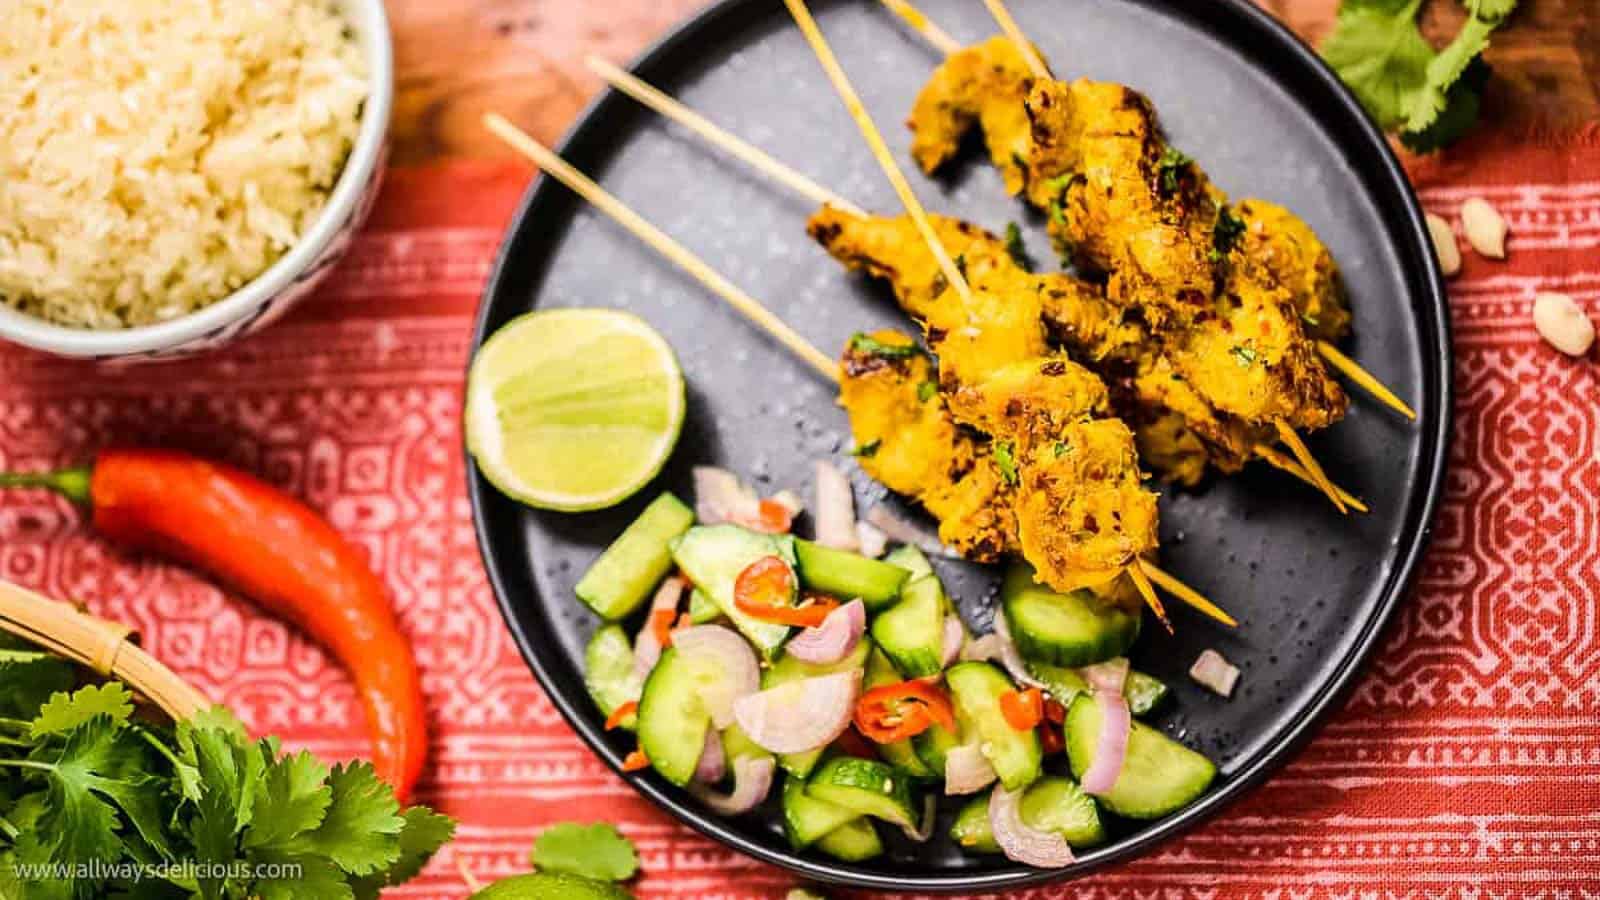 Thai chicken skewers and rice served with cucumbers, inspired by street foods.